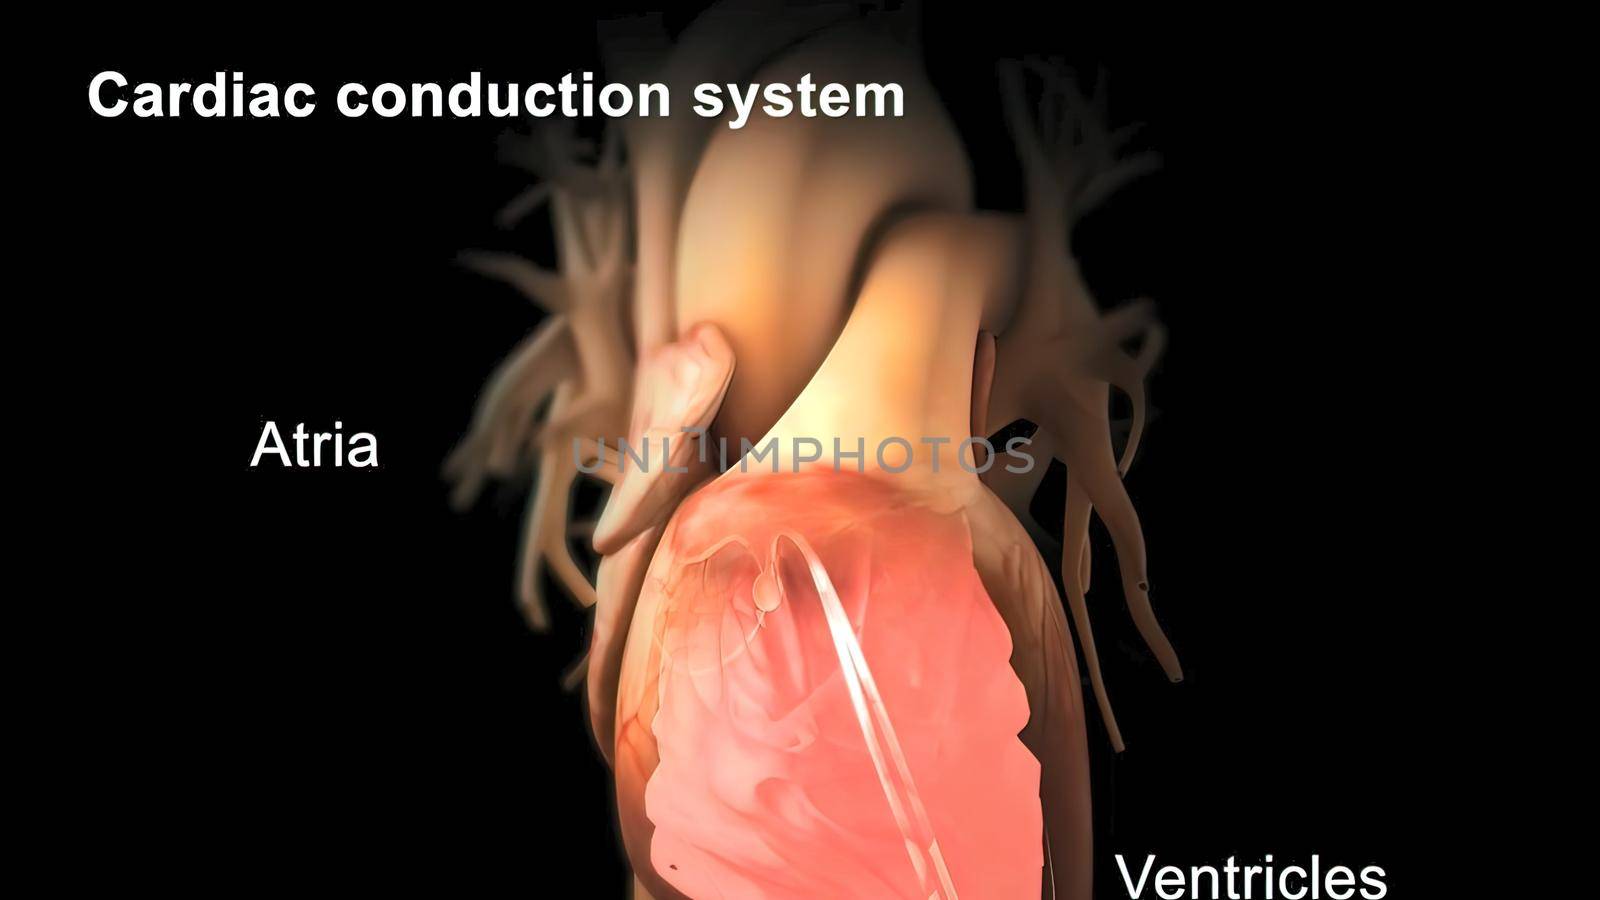 The pacemaker tissue in the right atrium of the heart. It provides the output of the normal sinus rhythm. 3D illustration